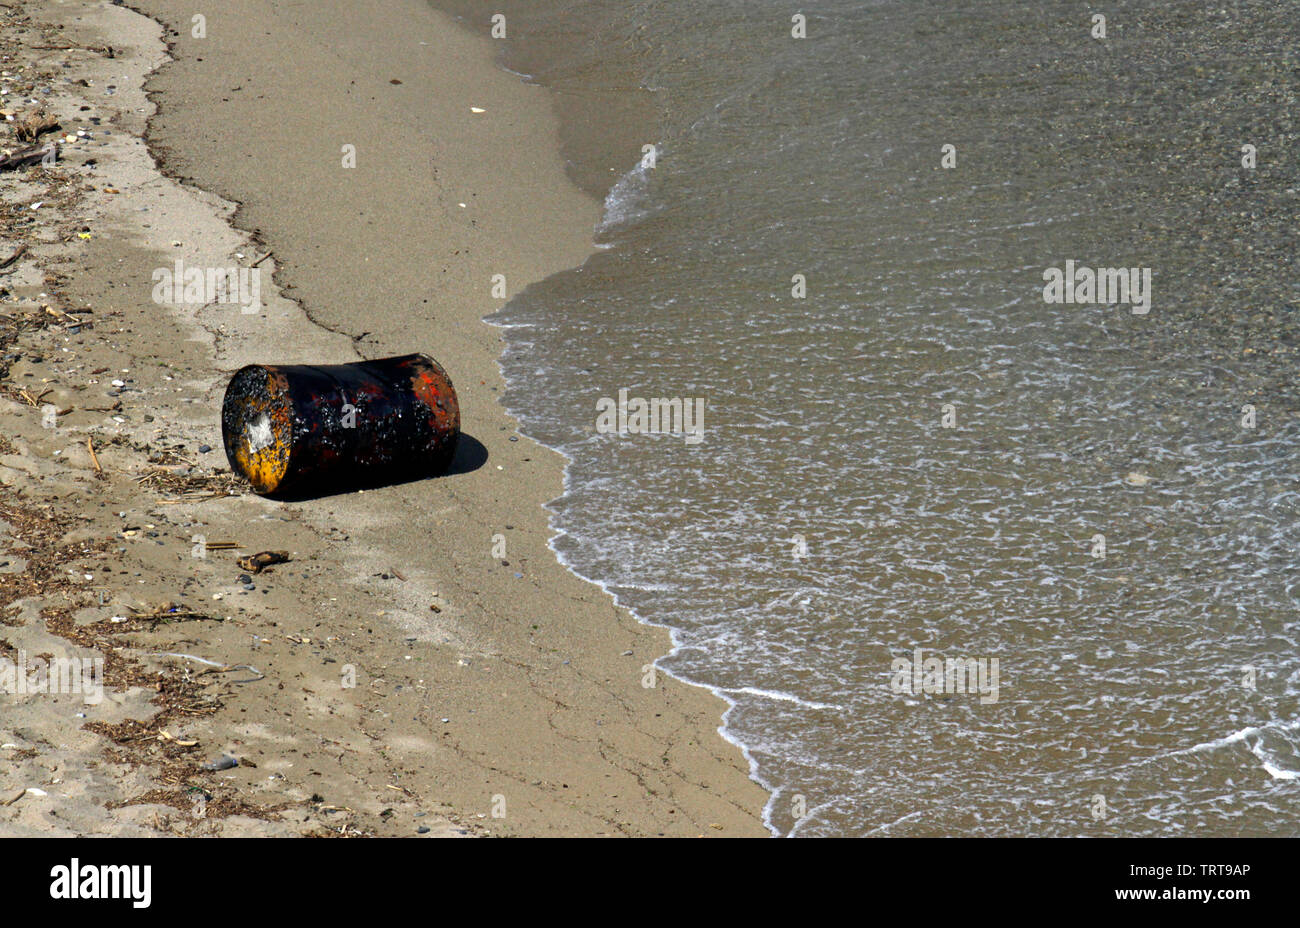 Ocean pollution: Old rusty oil barrel washed onto a beach Stock Photo